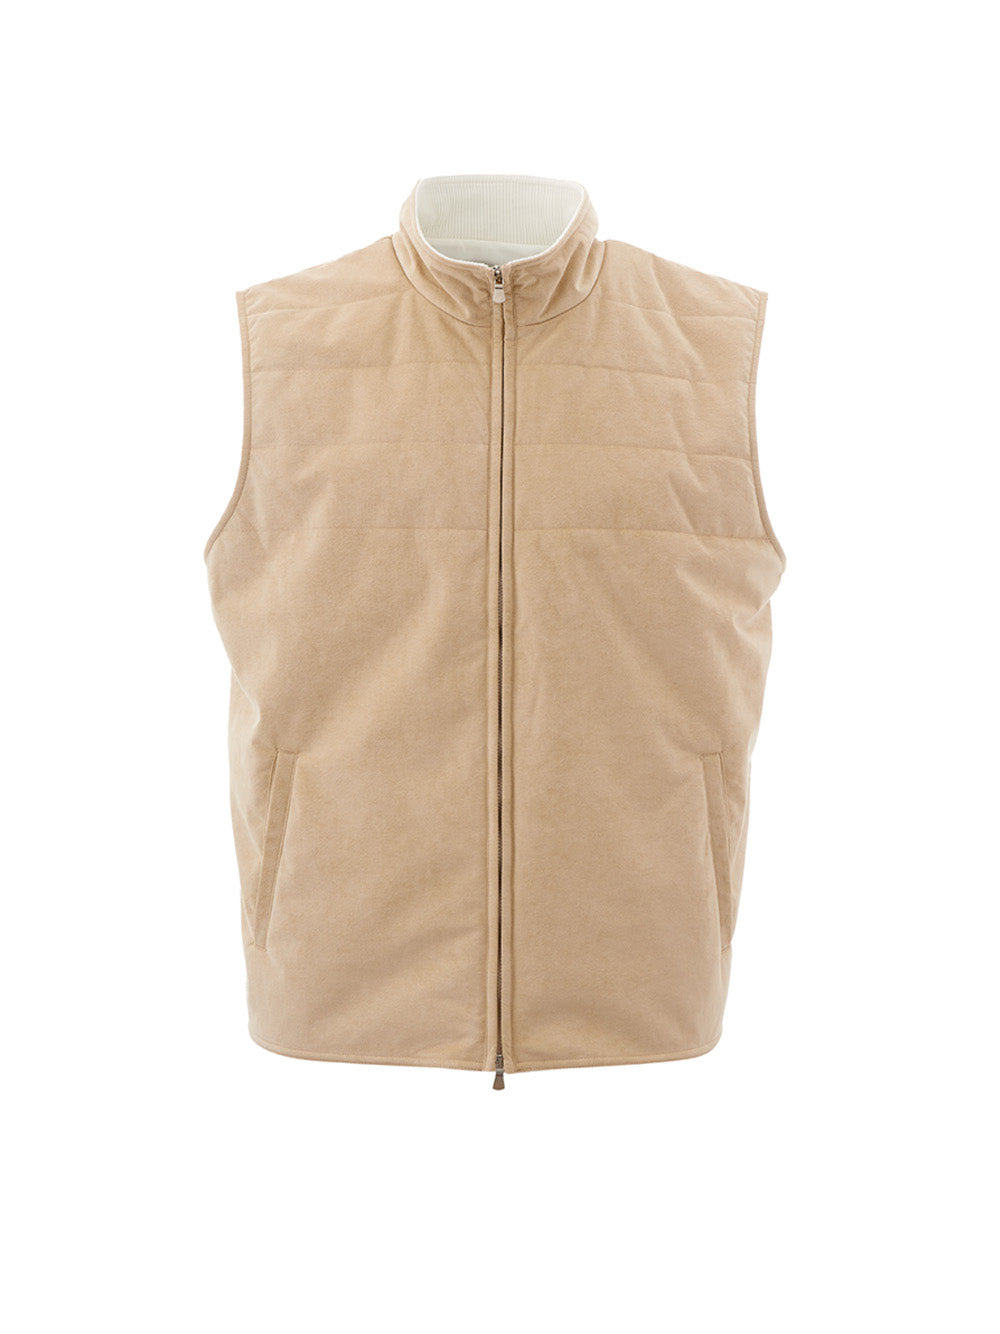 Padded Quilted Sleeveless jacket